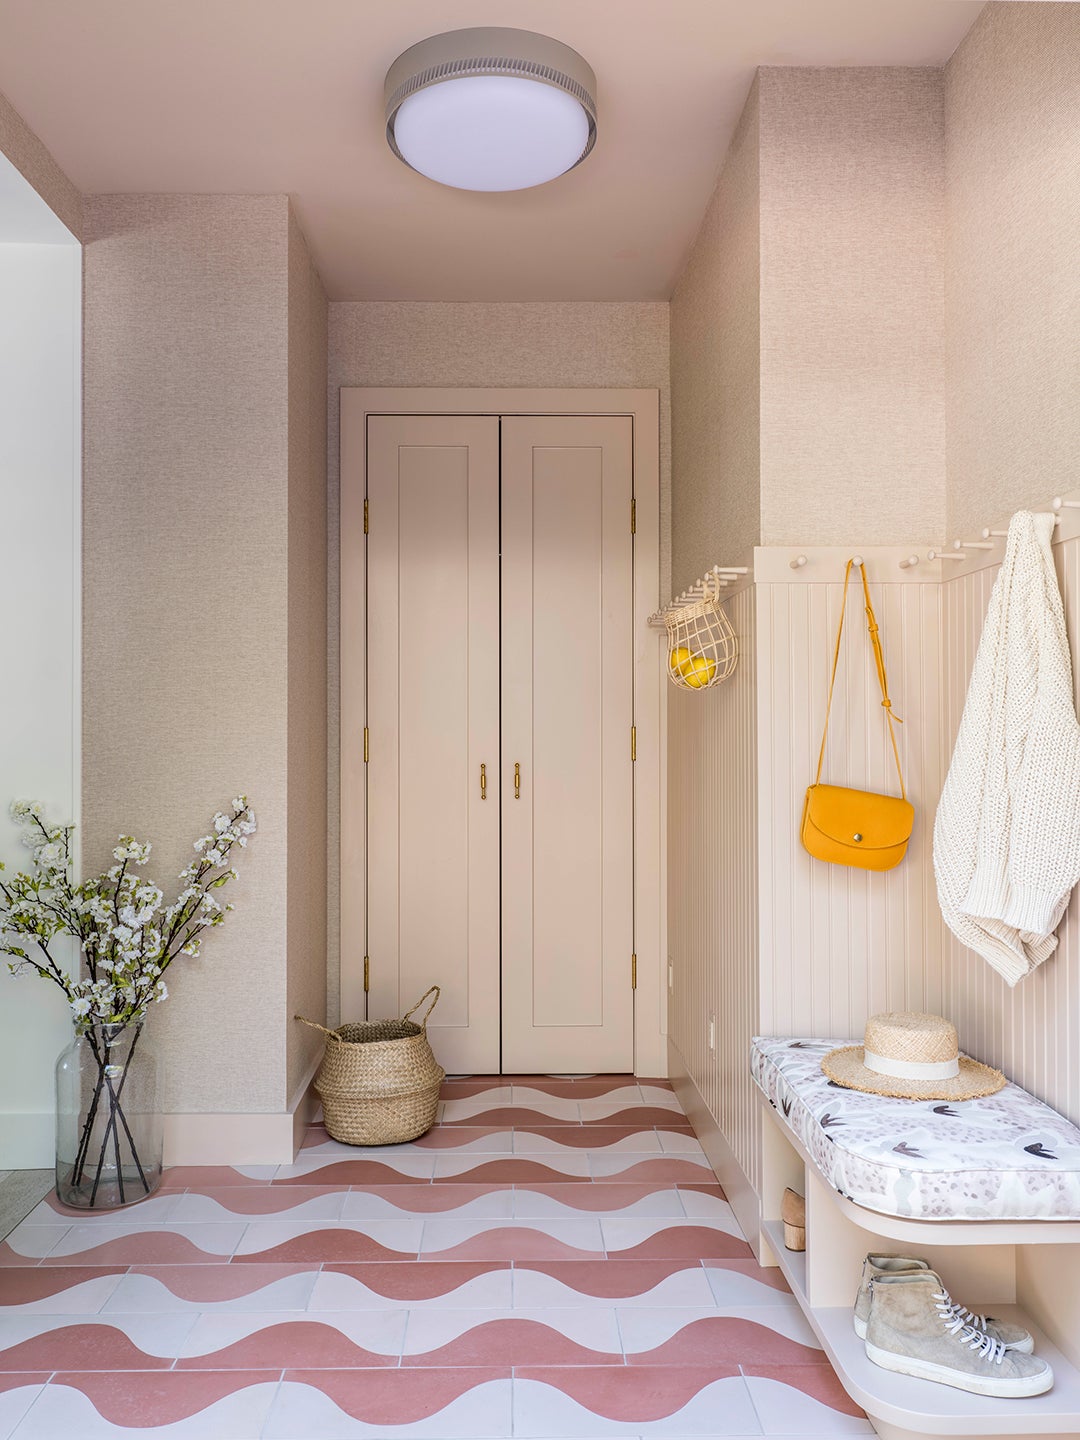 5 Small Mudroom Ideas That Control The Just-Got-Home Chaos